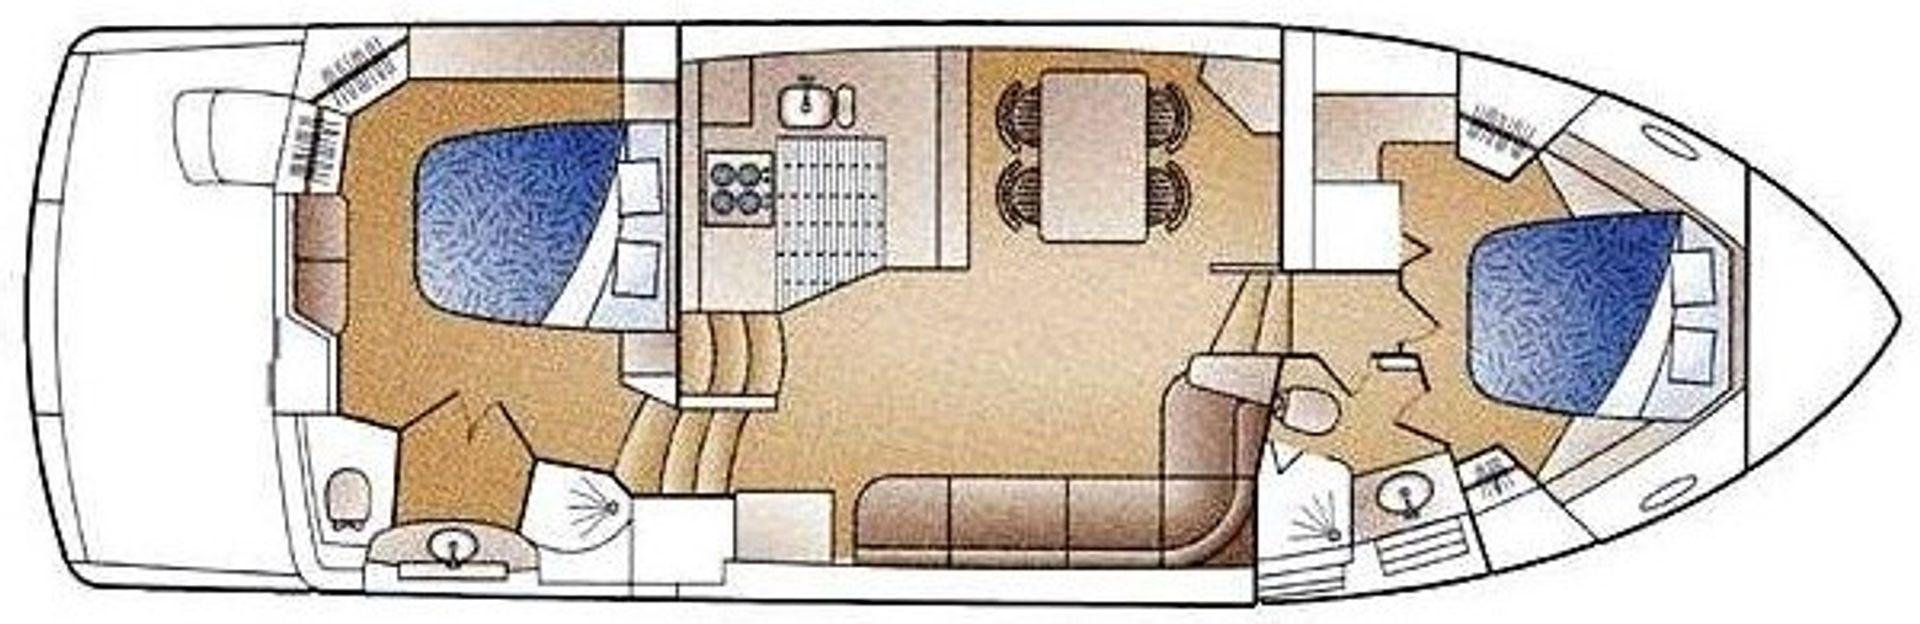 General below deck arrangement & layout. Couch on starboard side has pull out bed. Also aft seat is a lounger. Dinette replaced w/ booth style storage seating. 